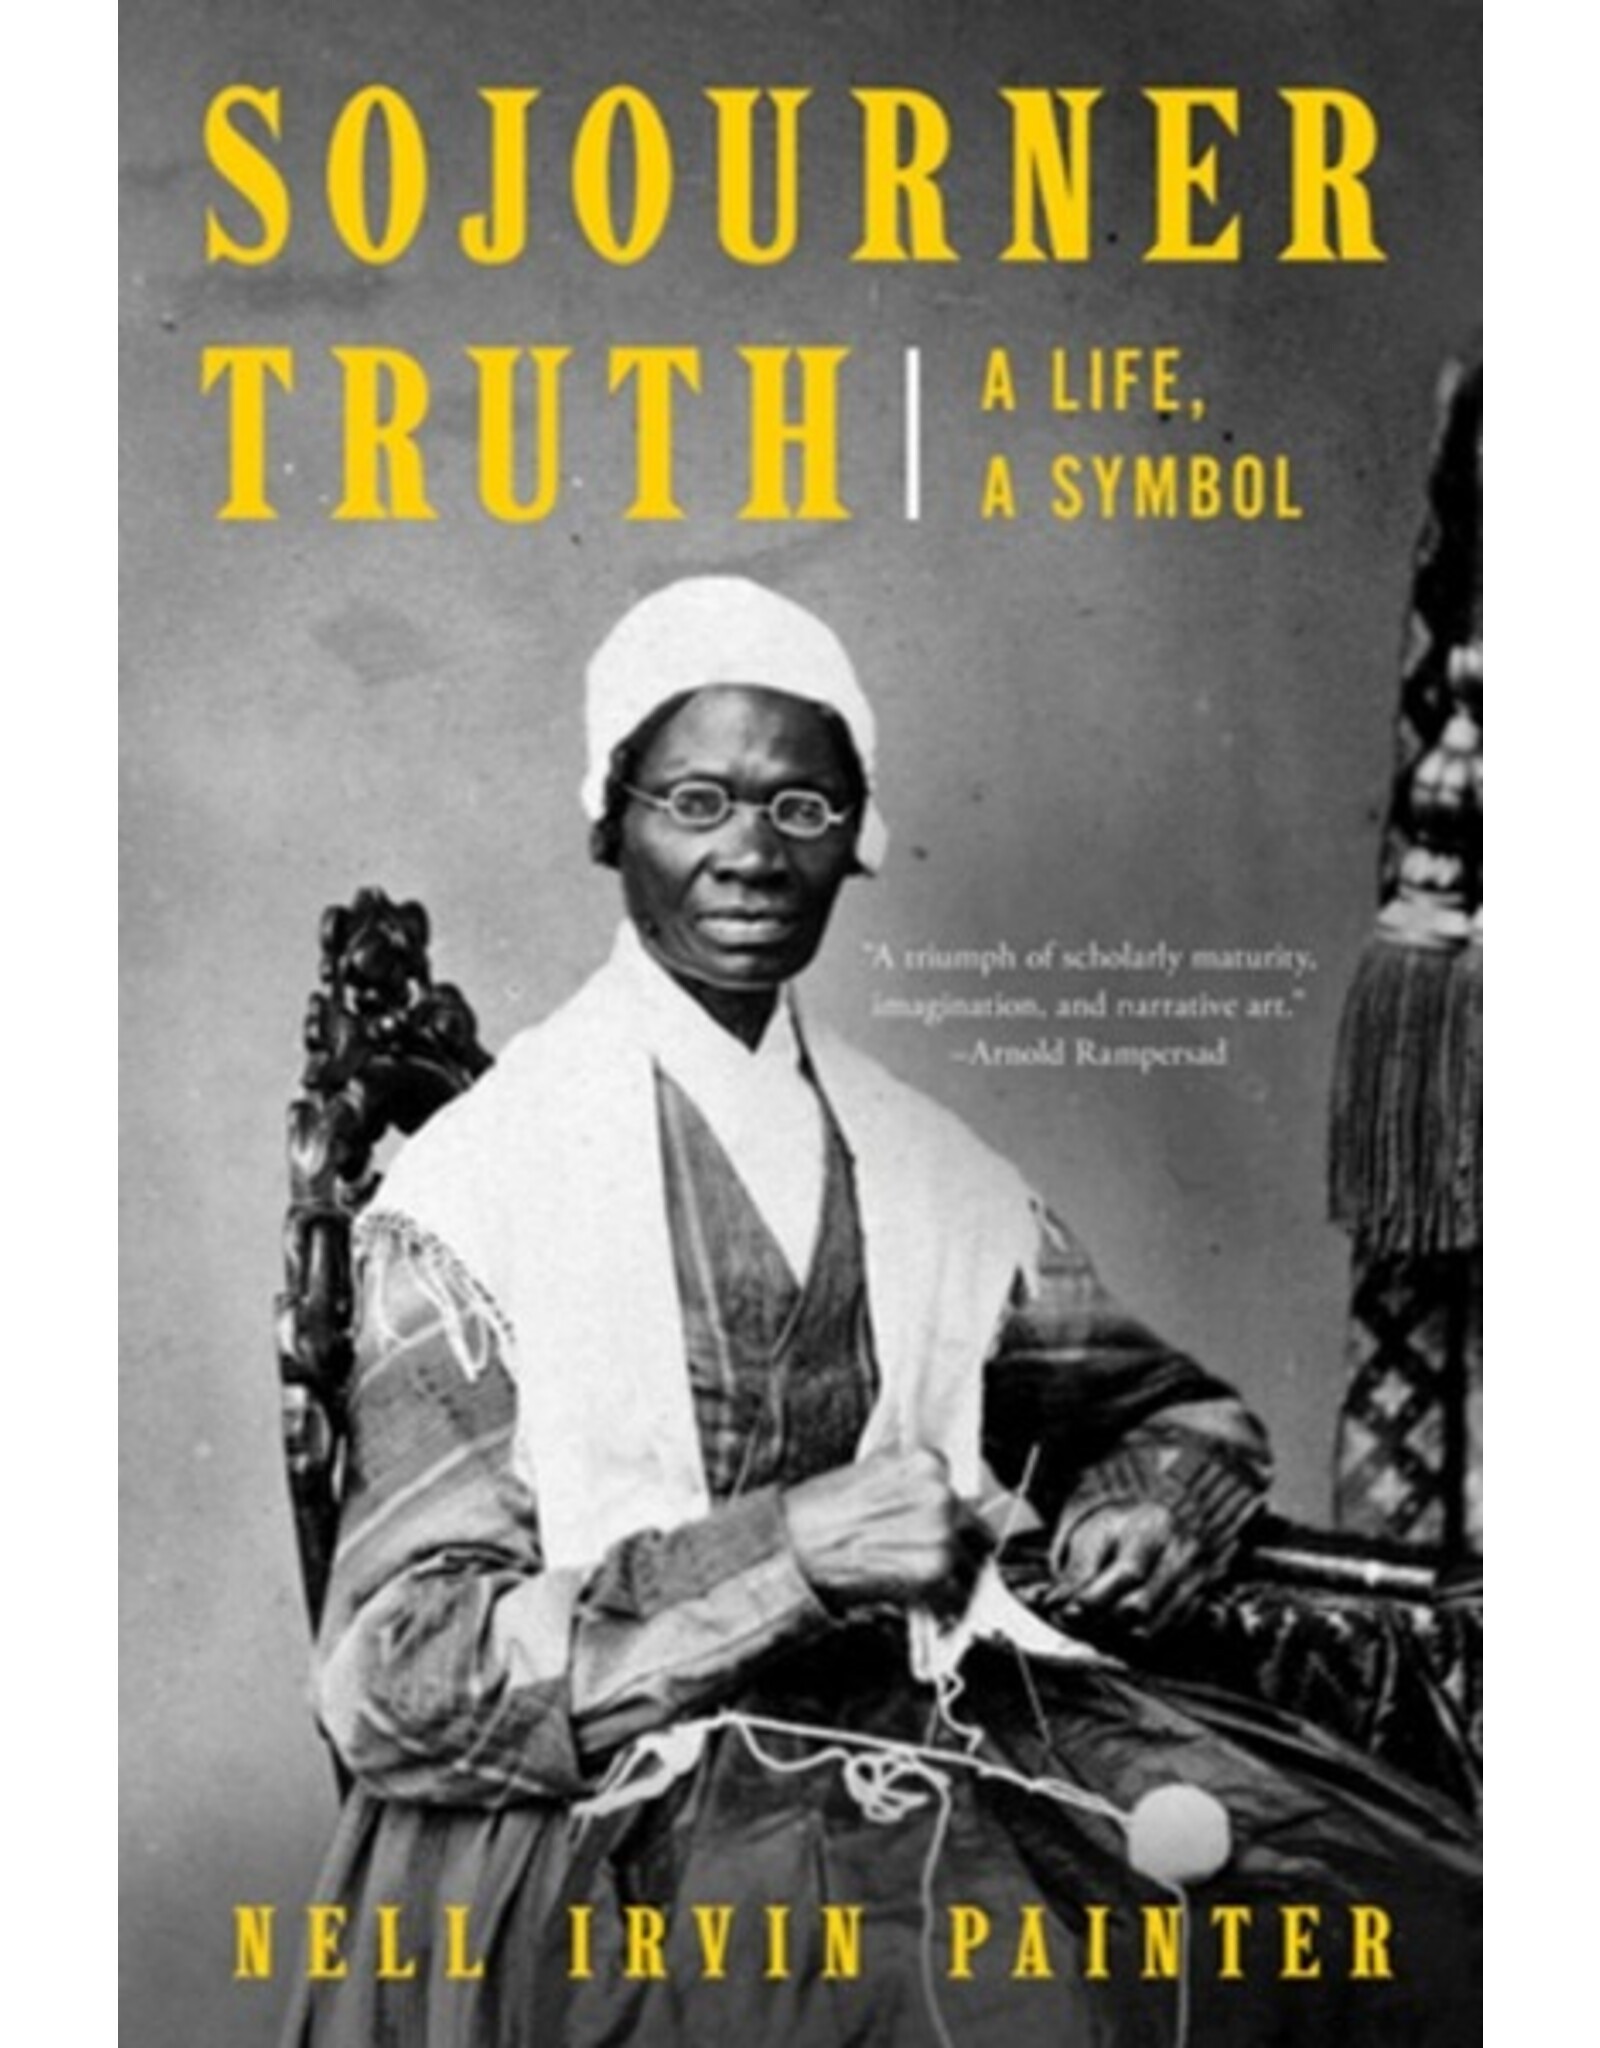 Books Sojourner Truth: A Life , A Symbol by Nell Irvin Painter